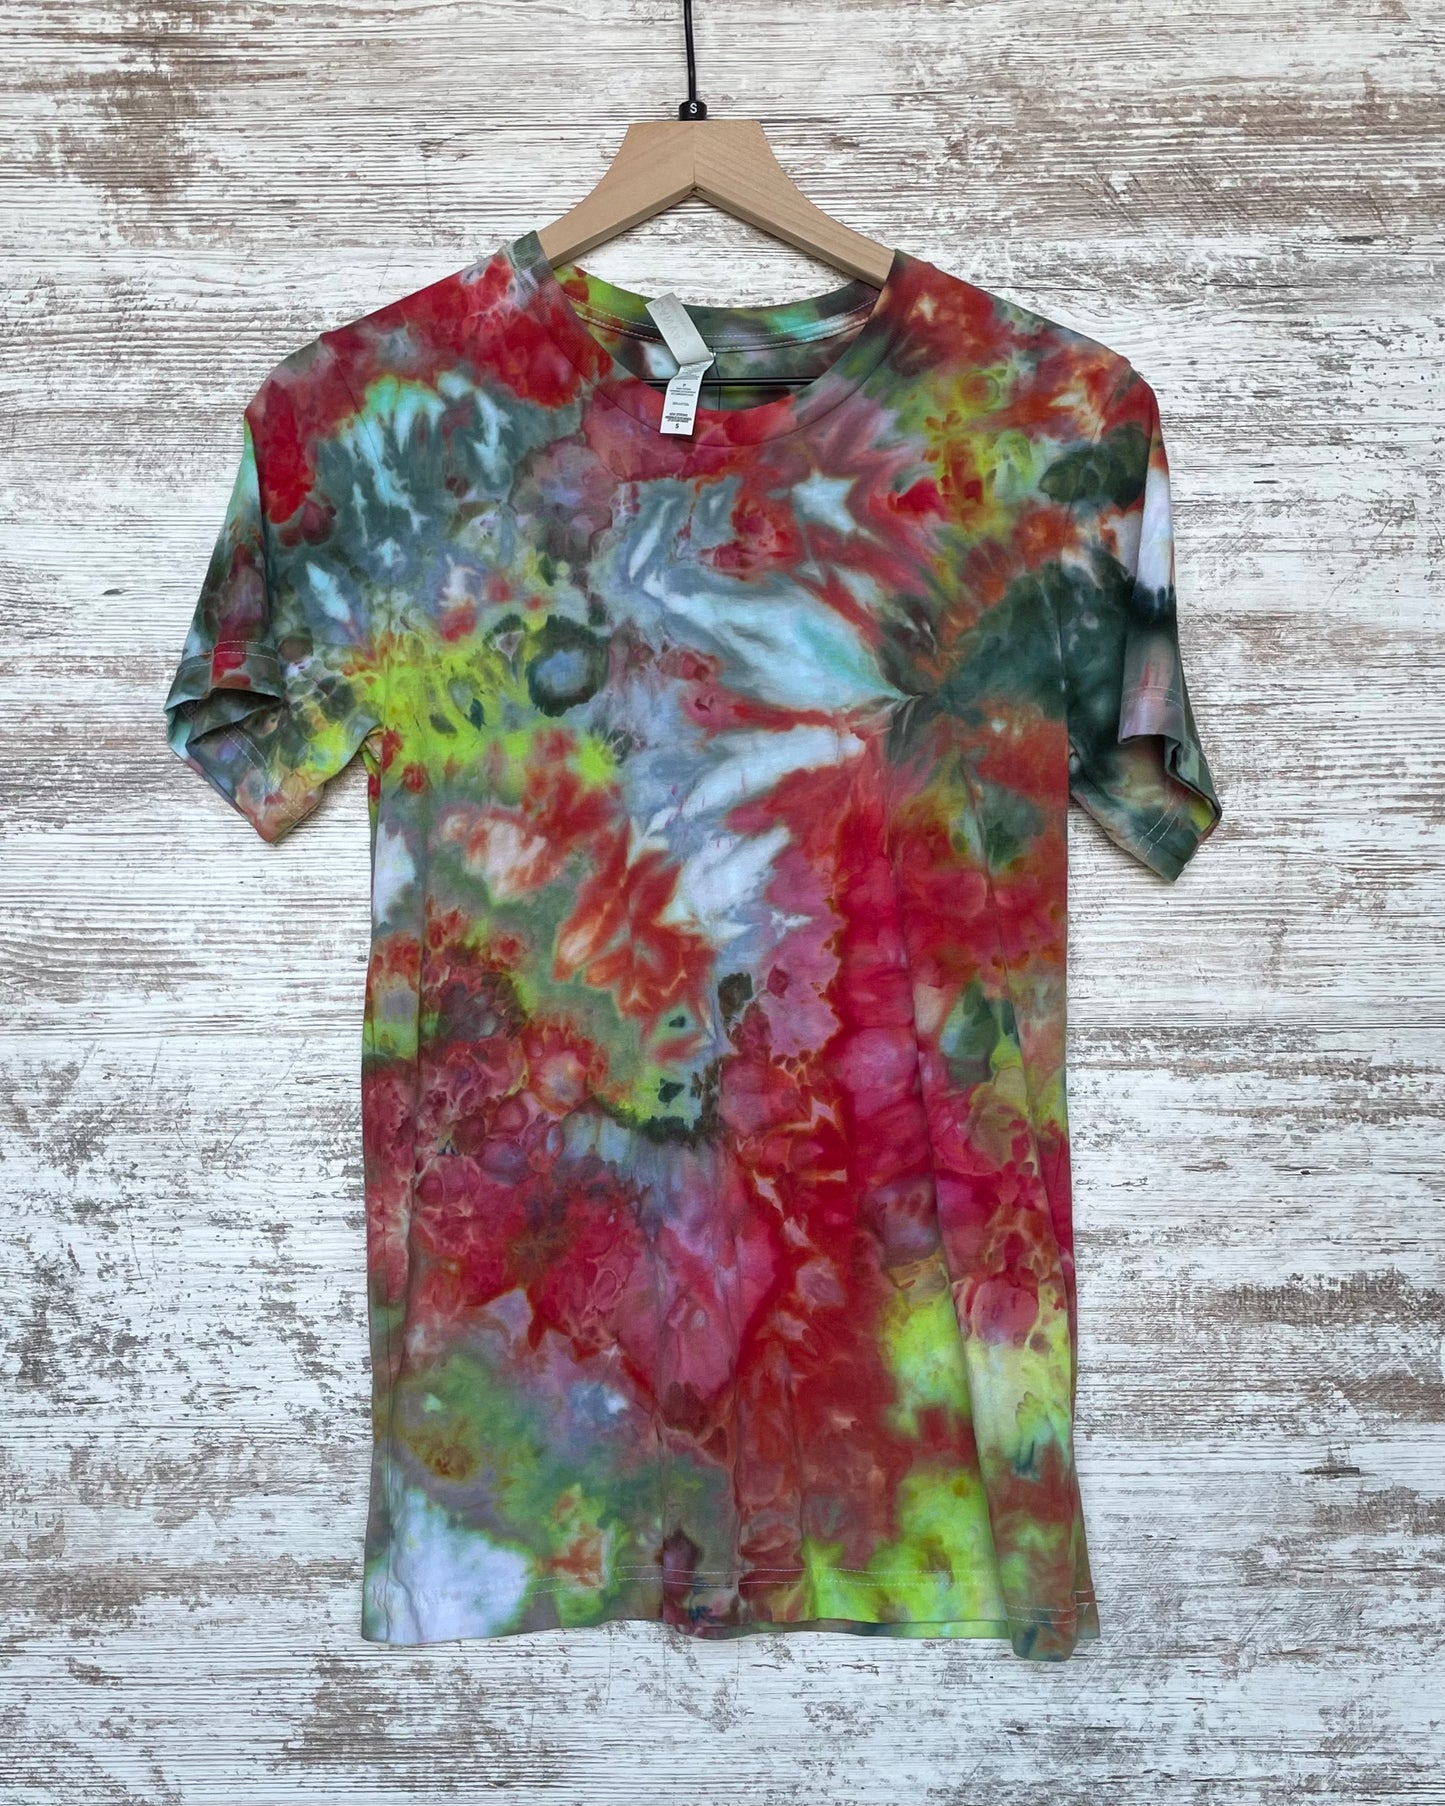 Unisex Adult Ice-Dyed T-shirt Red & Green